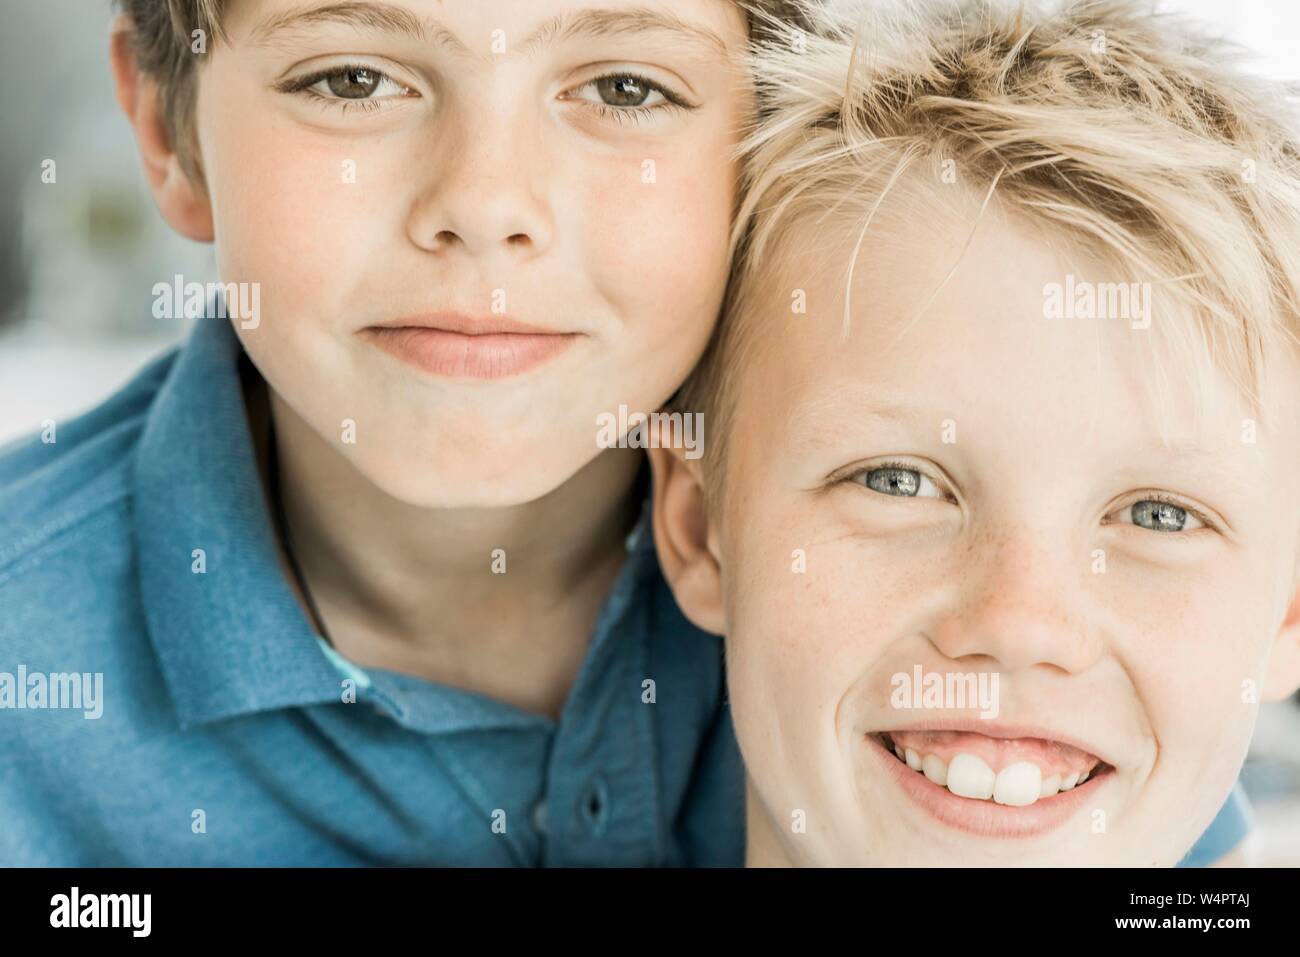 Two guys, friends, 10 years old, looking into the camera, portraits, smiling and cool, Germany Stock Photo